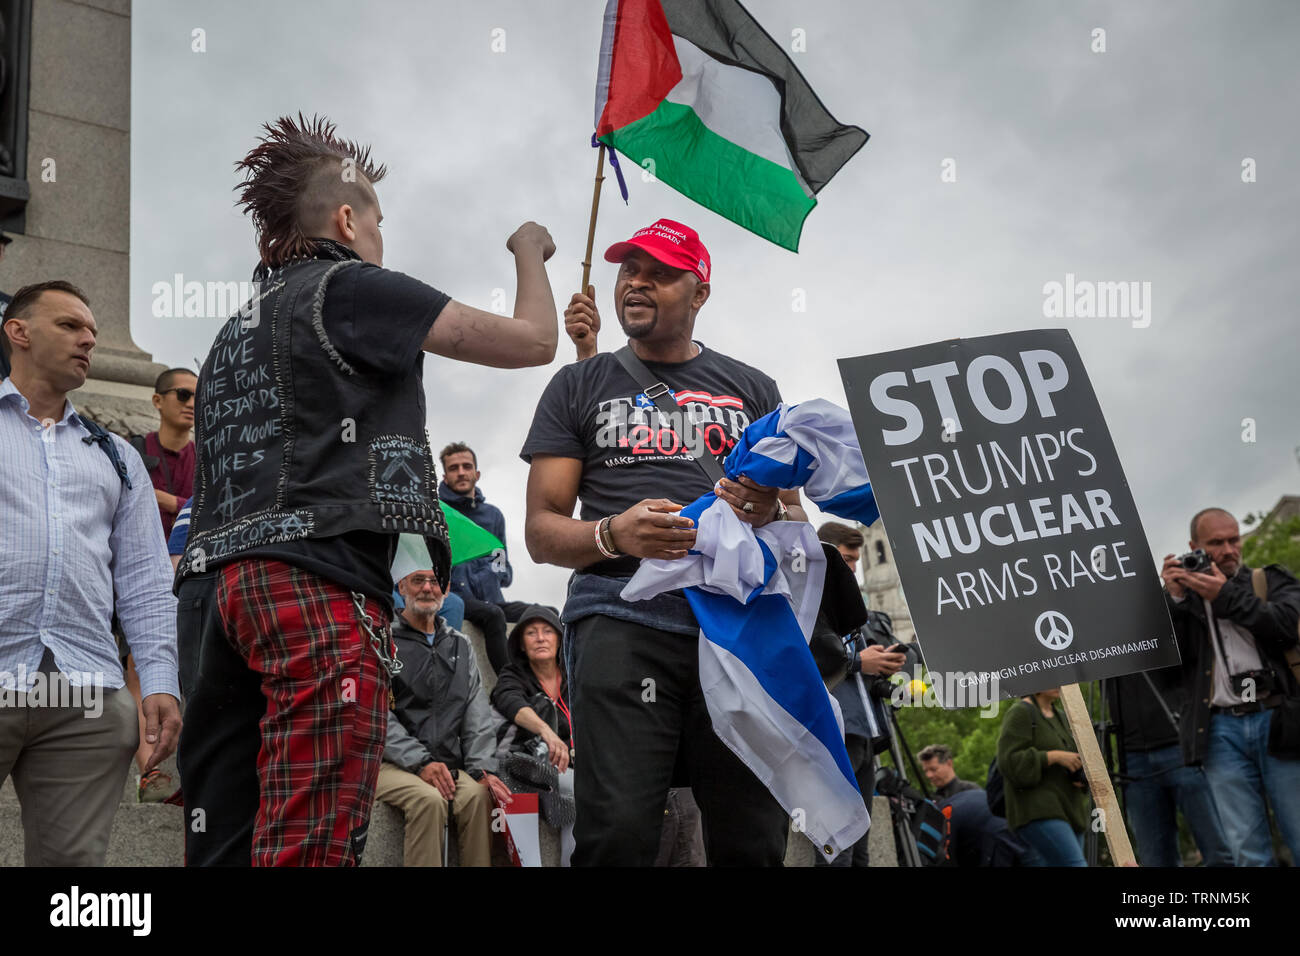 An LGBT anti-Trump(L) activist and a pro-Trump(C) supporter angrily debate in Trafalgar Square during the mass protests against US president Donald Trump's UK state visit. Stock Photo